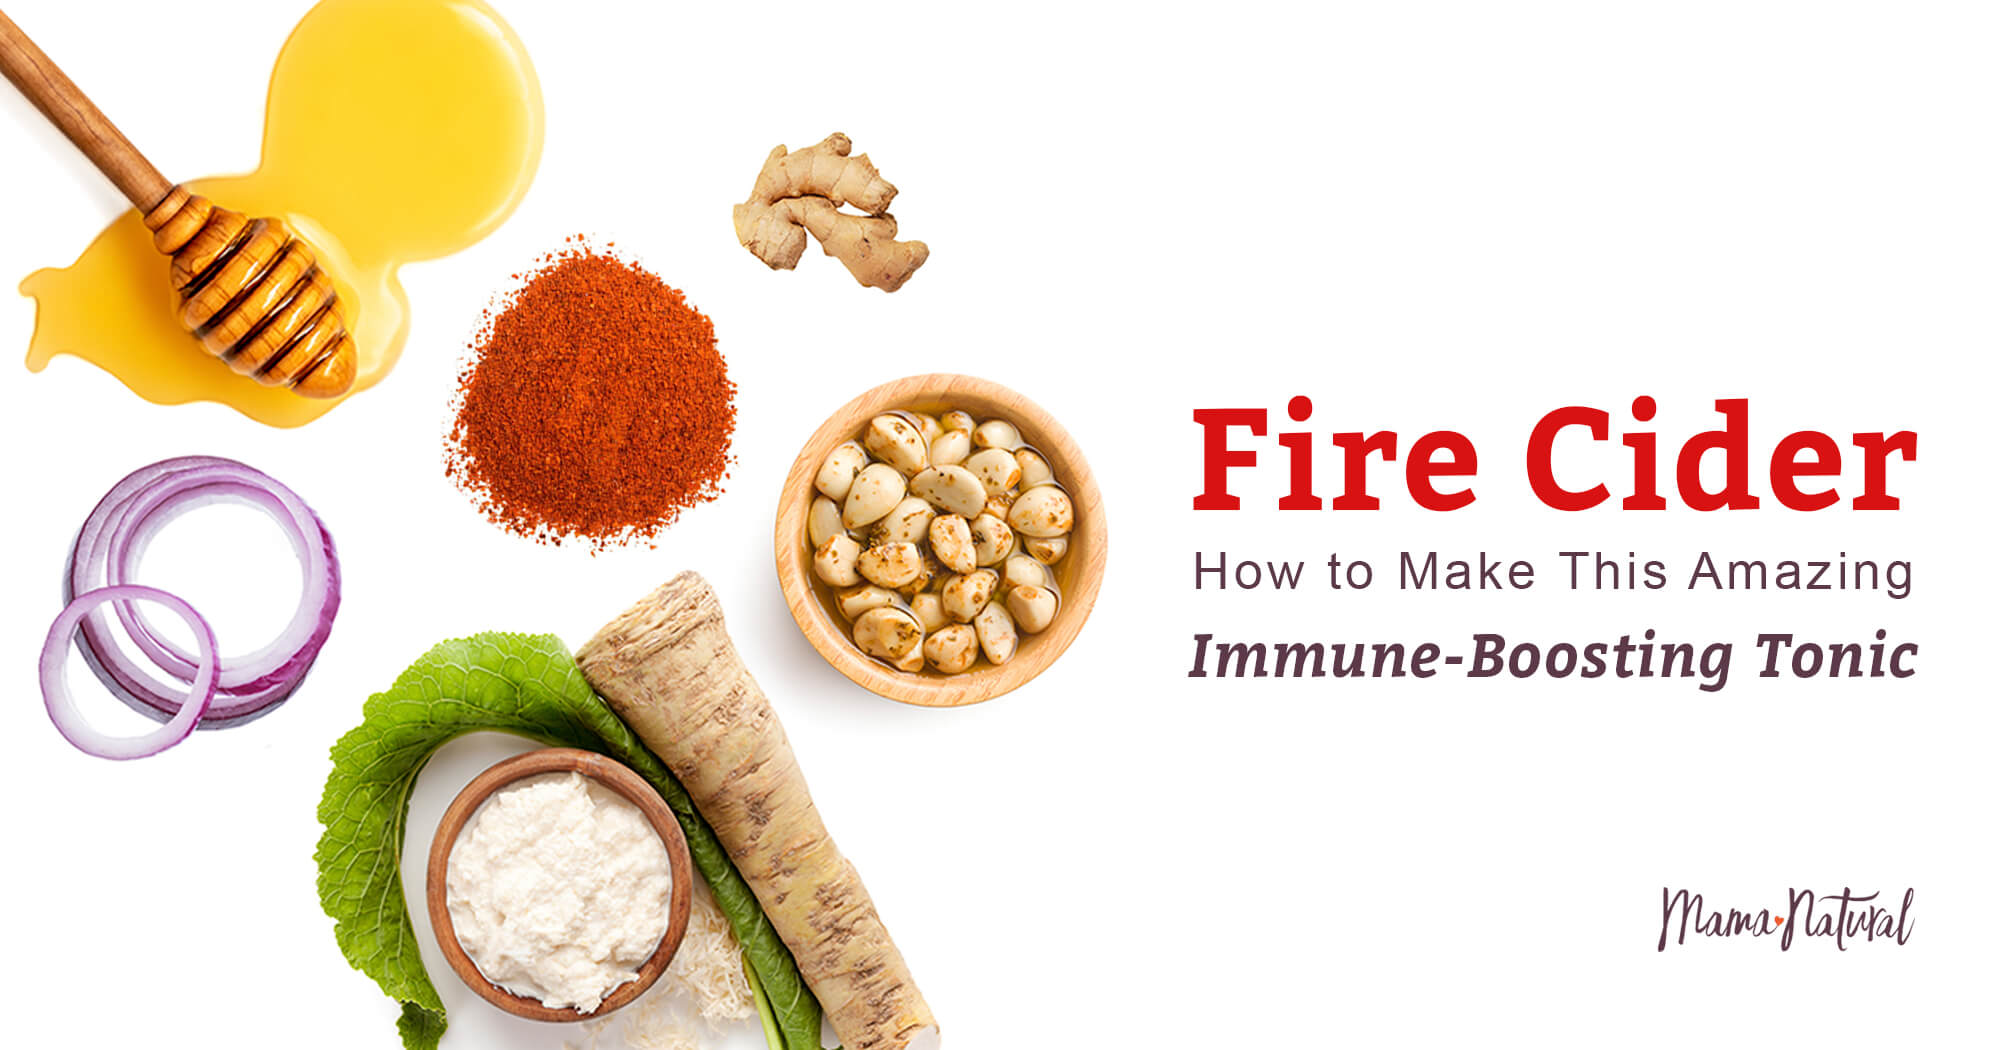 How to Make This Amazing Immune-Boosting Tonic [Video]